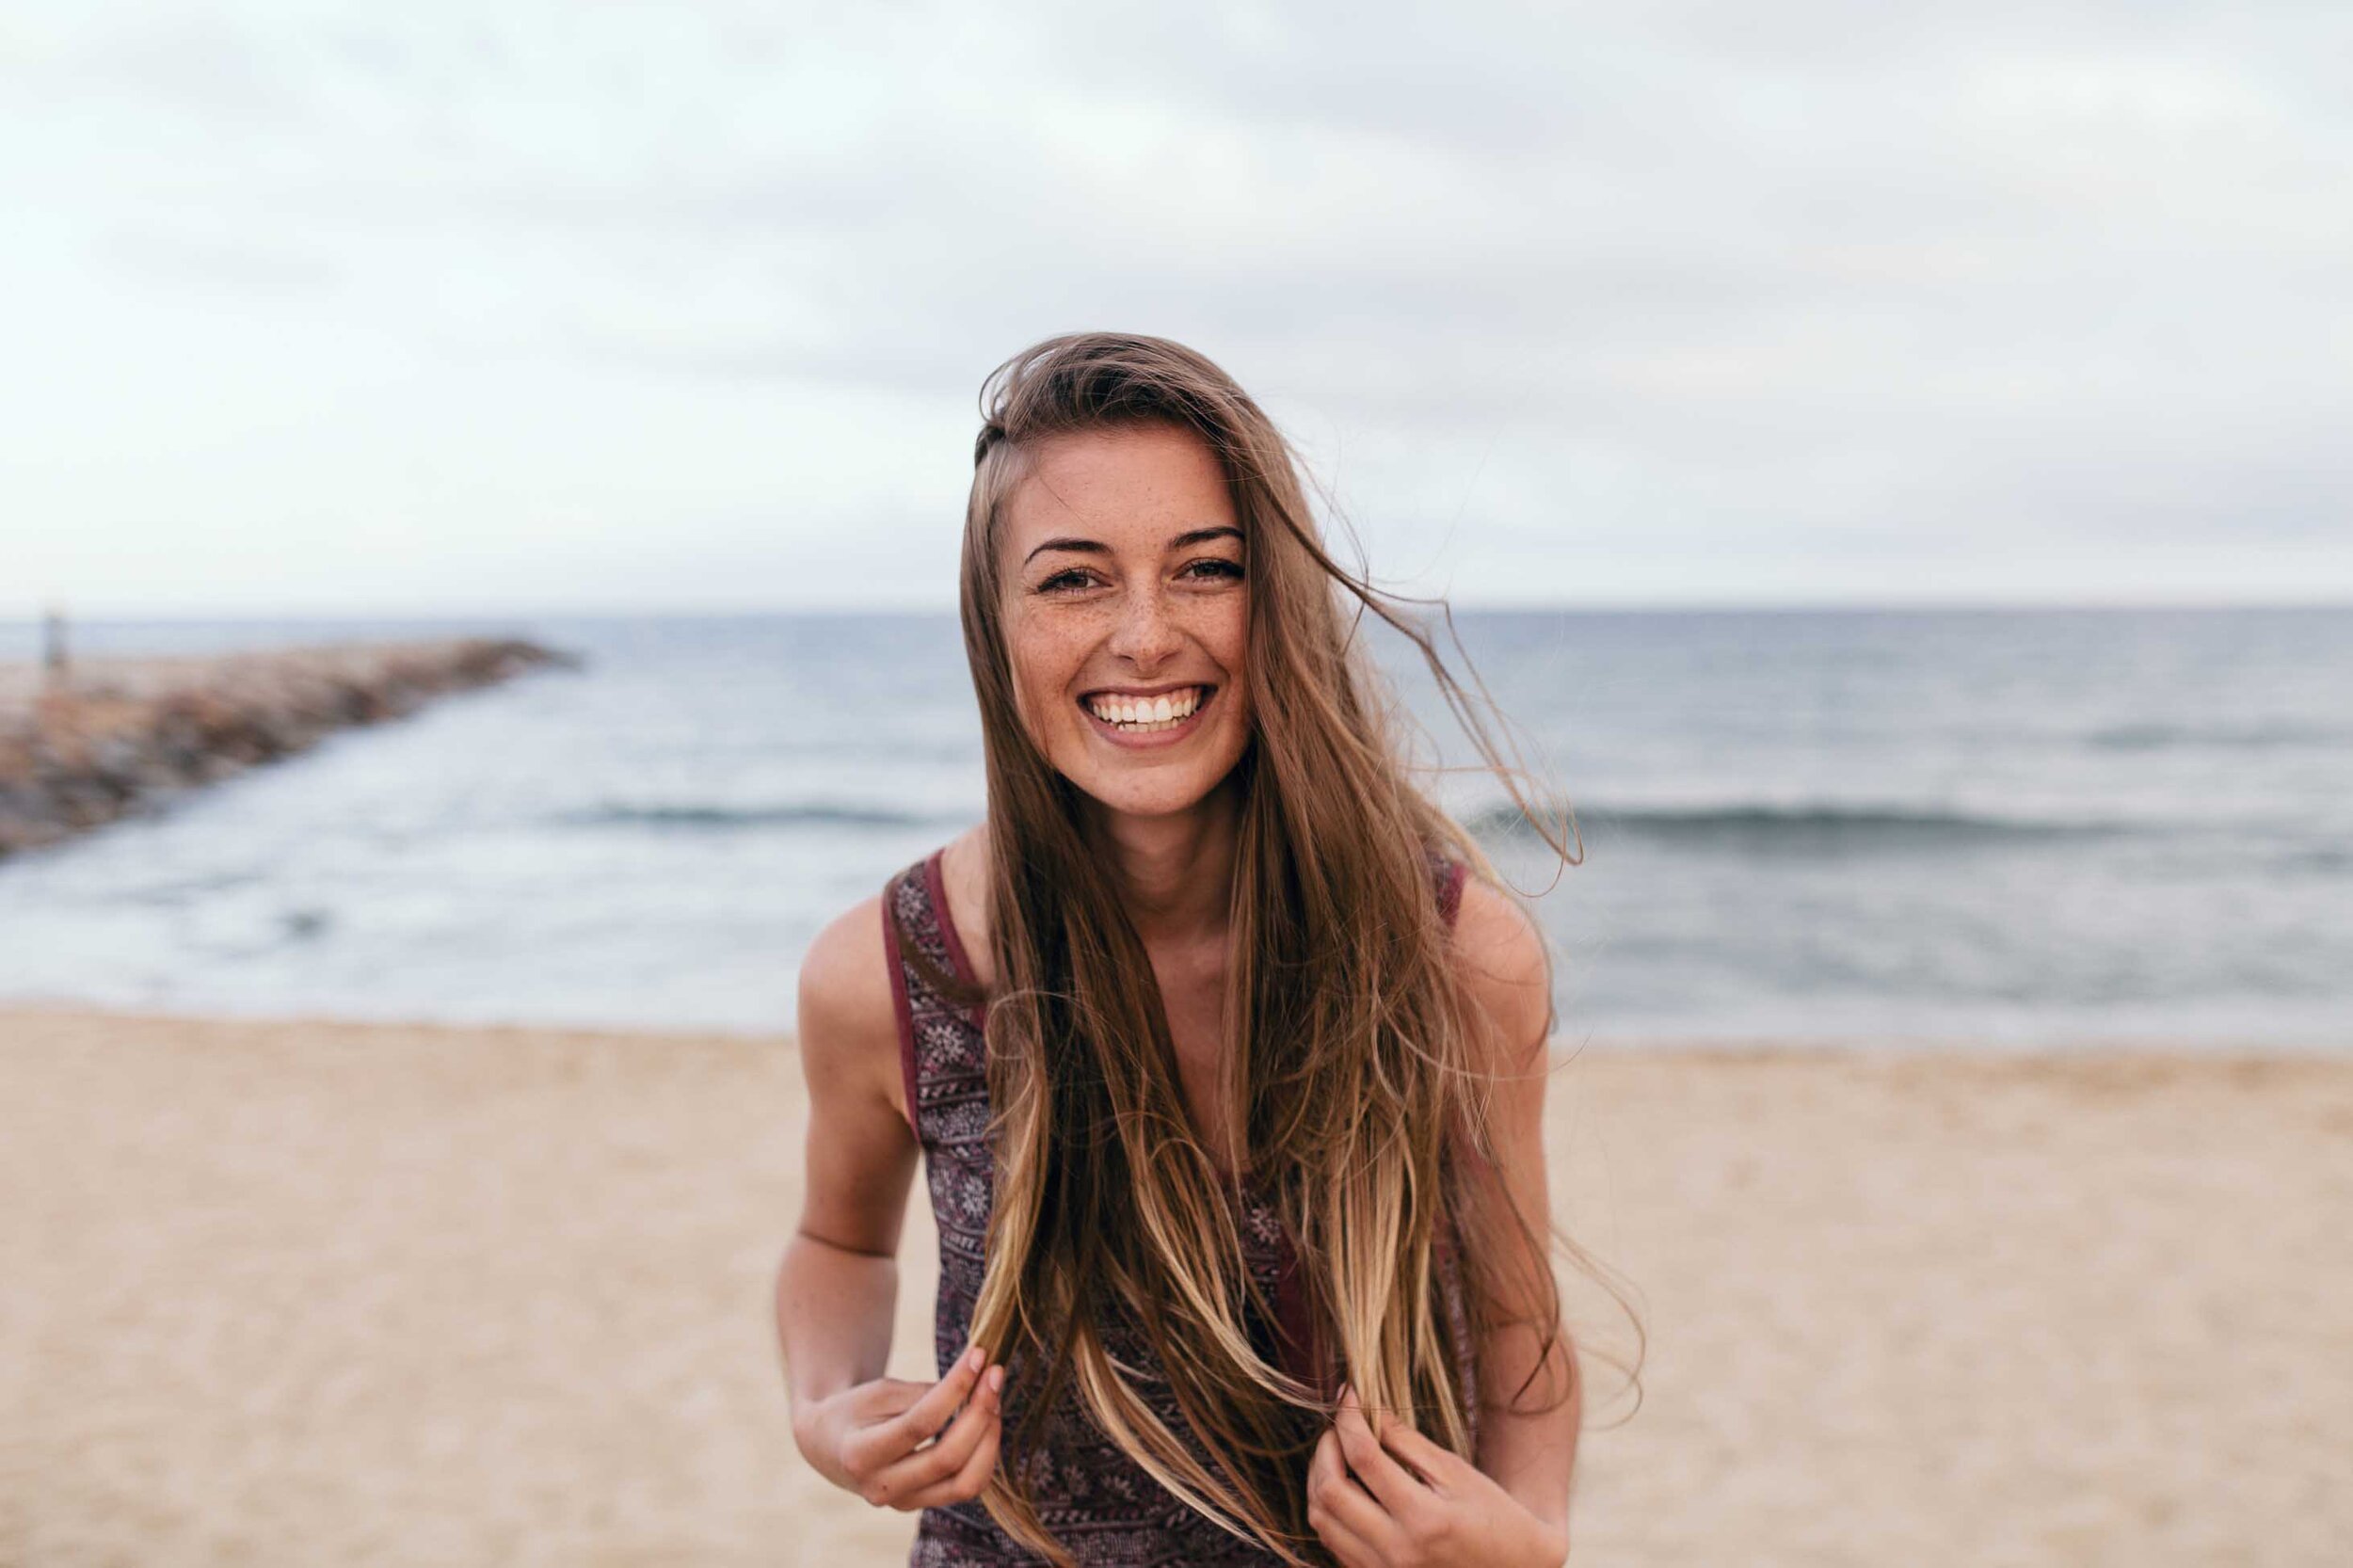 Long haired woman with freckles smiles at the camera on the beach with the ocean behind her